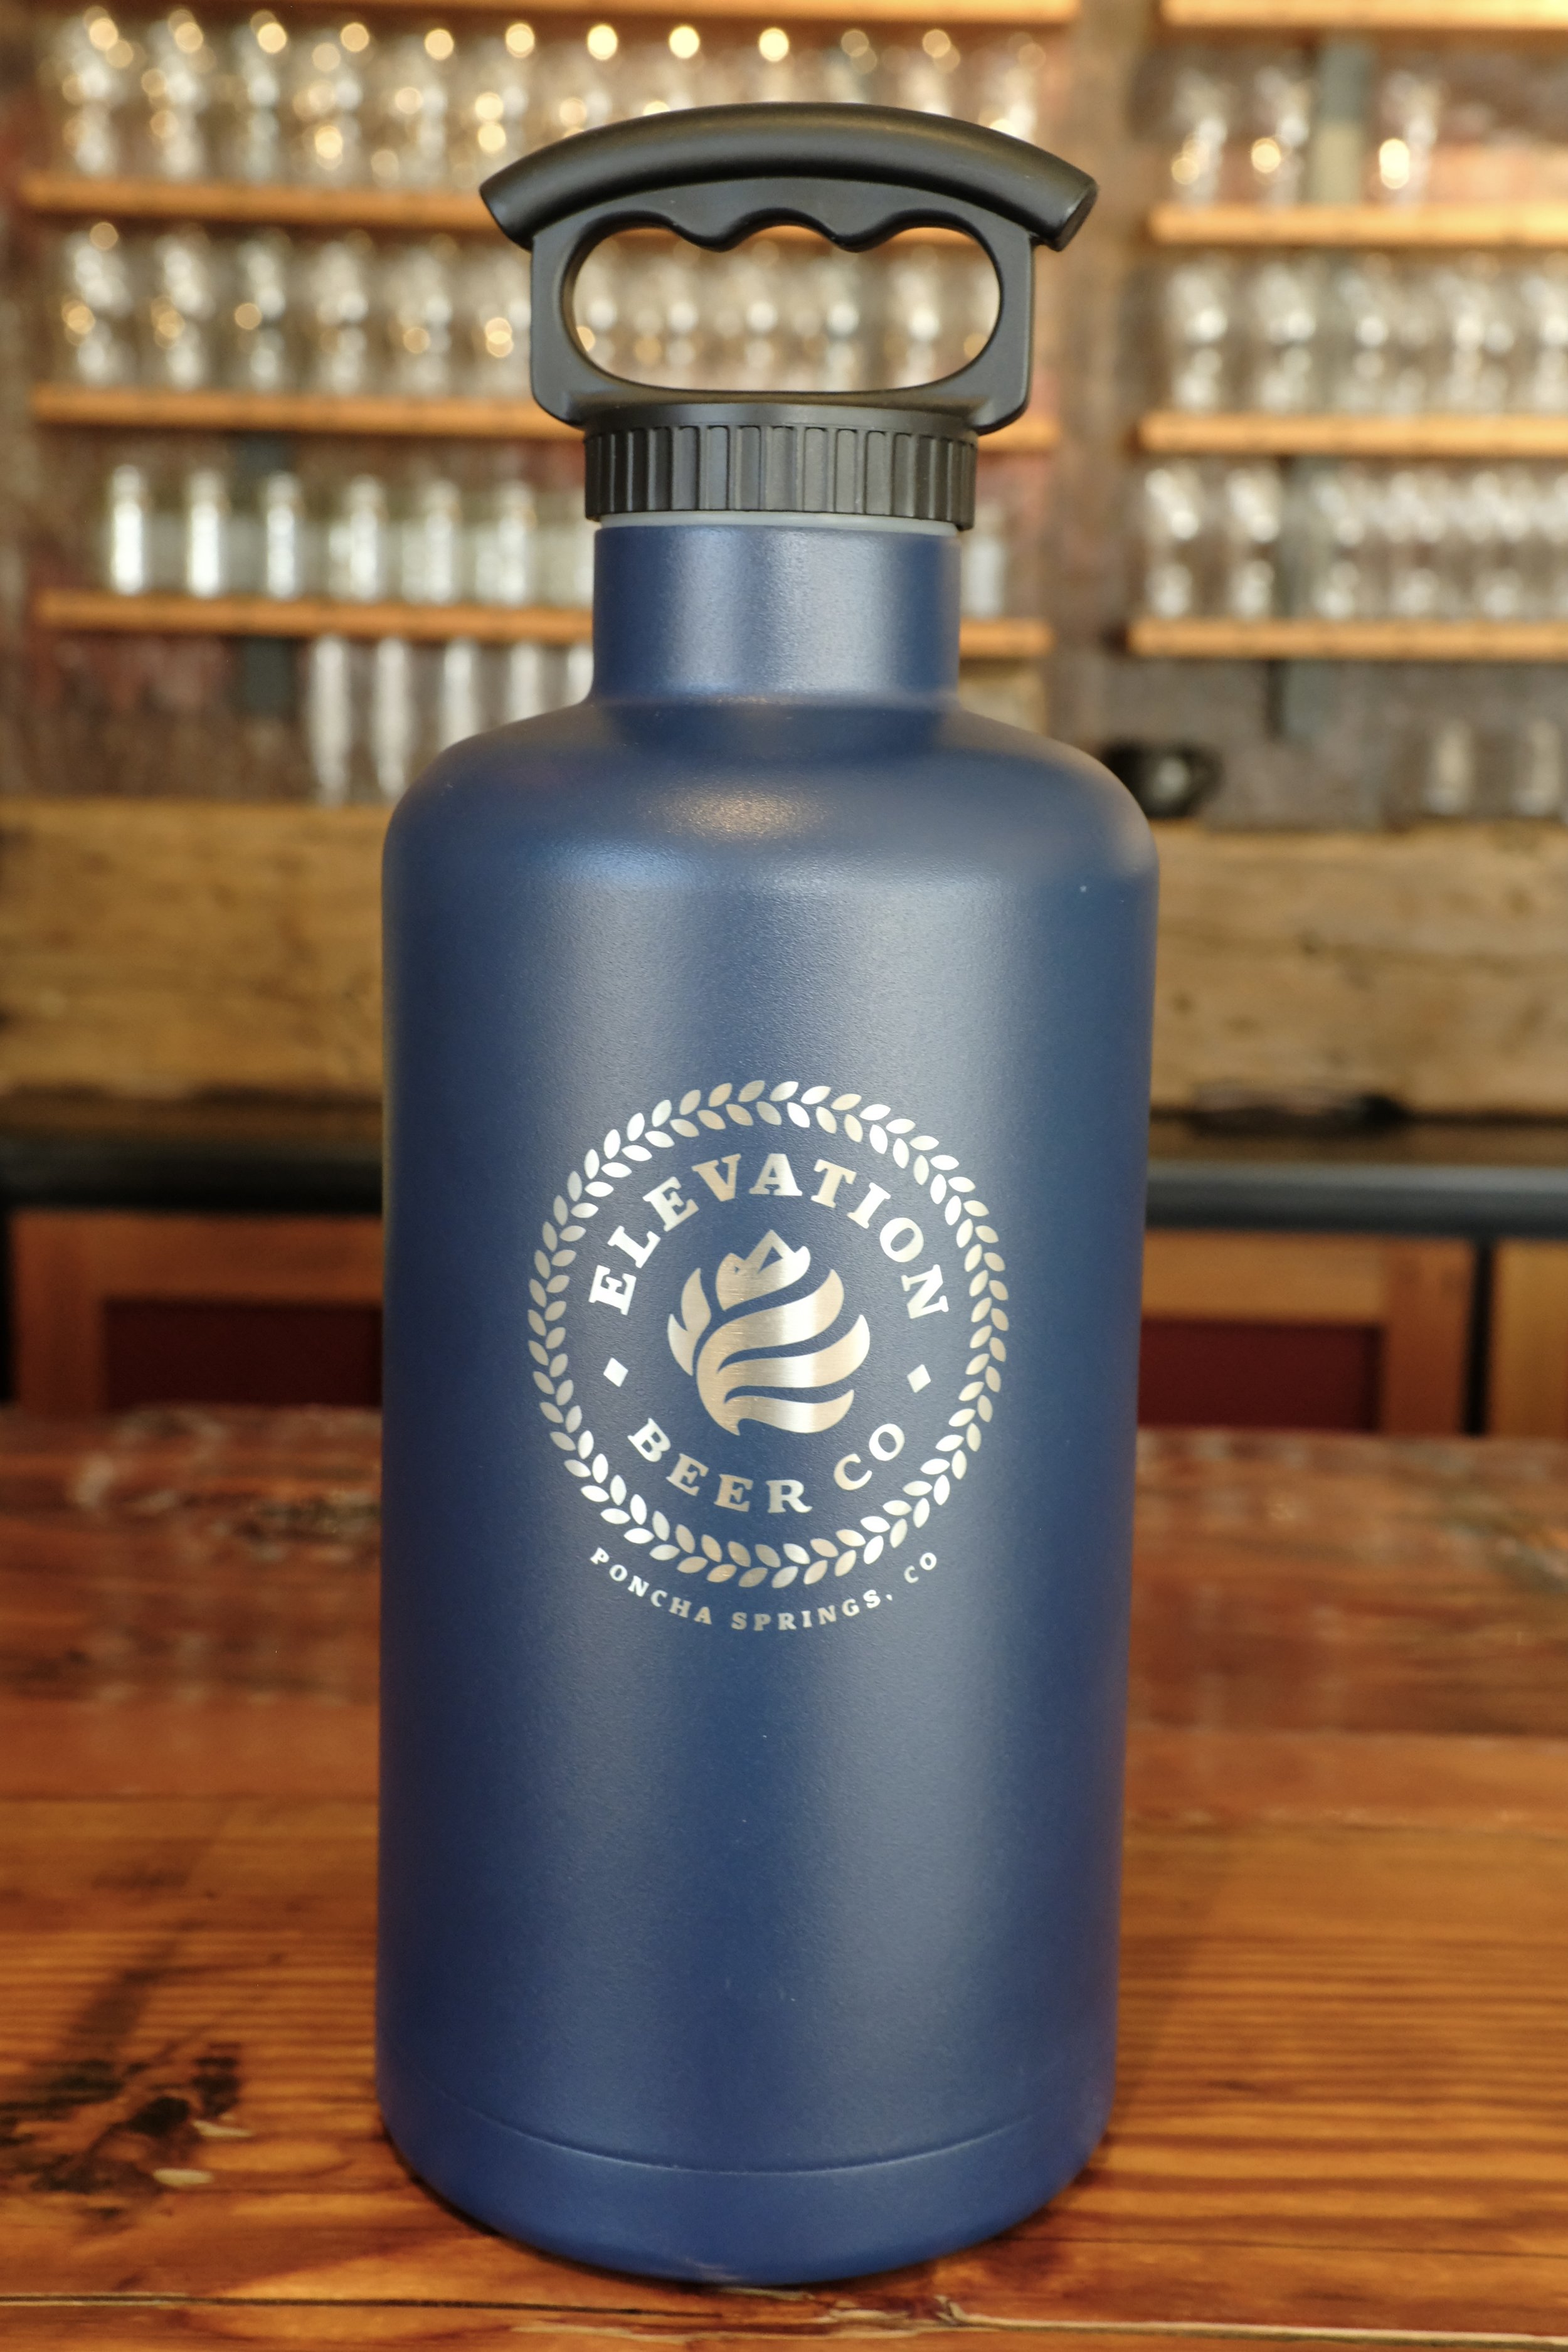 Reduce 14oz Stainless Steel Hydro Pro Koala Bottle Green I HAVE 11 OF  THESE. - Beverages - Louisville, Kentucky, Facebook Marketplace